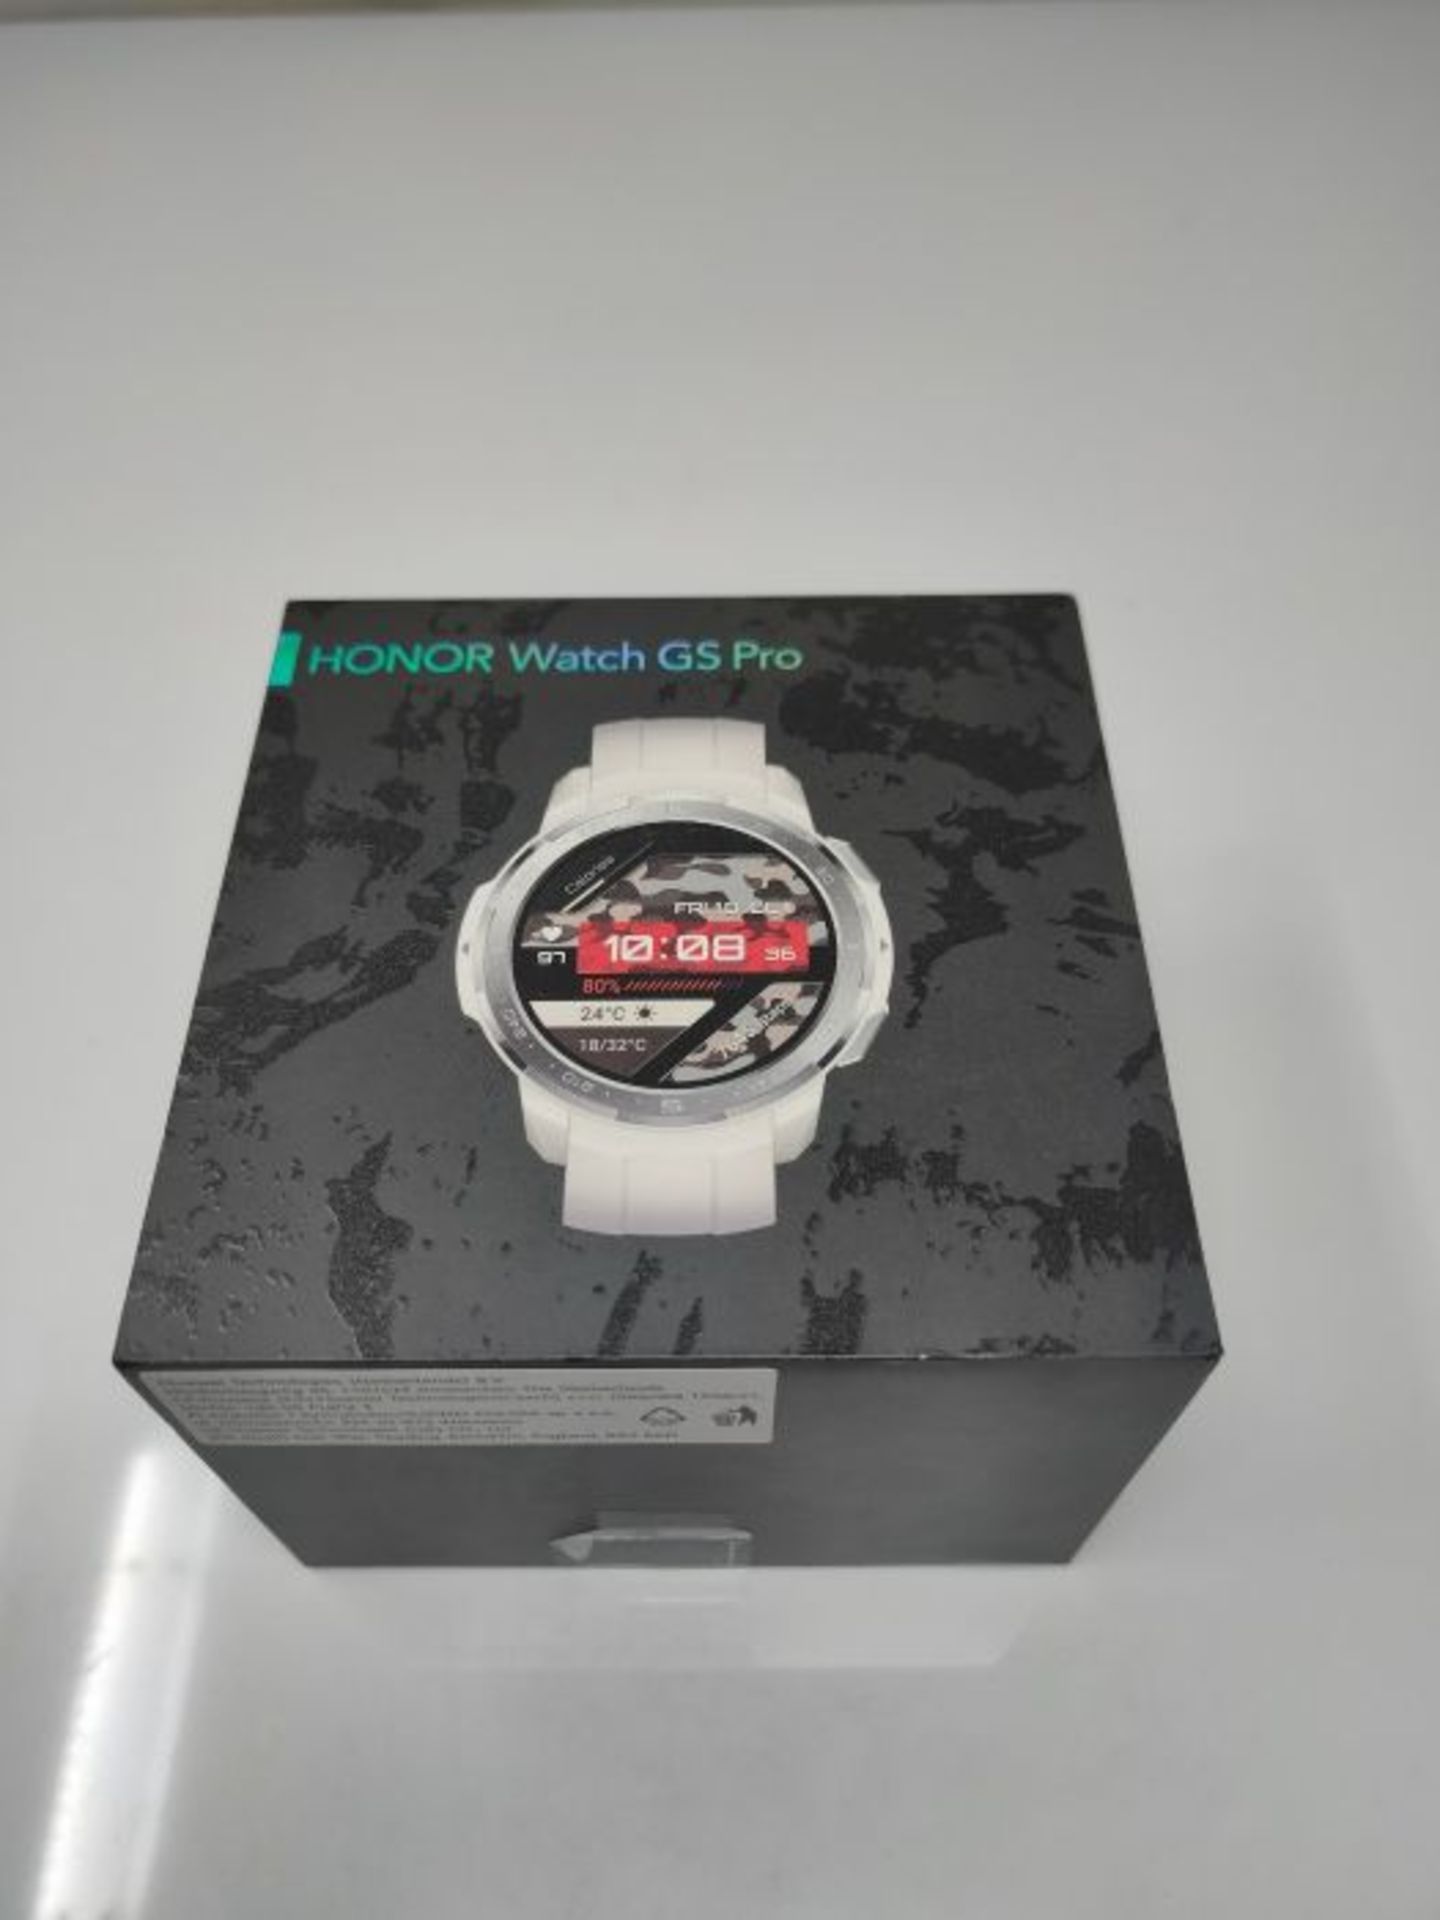 RRP £219.00 HONOR Watch GS Pro Smartwatch (35 mm AMOLED Display, SpO2 Measurement, Heart Rate Moni - Image 2 of 3